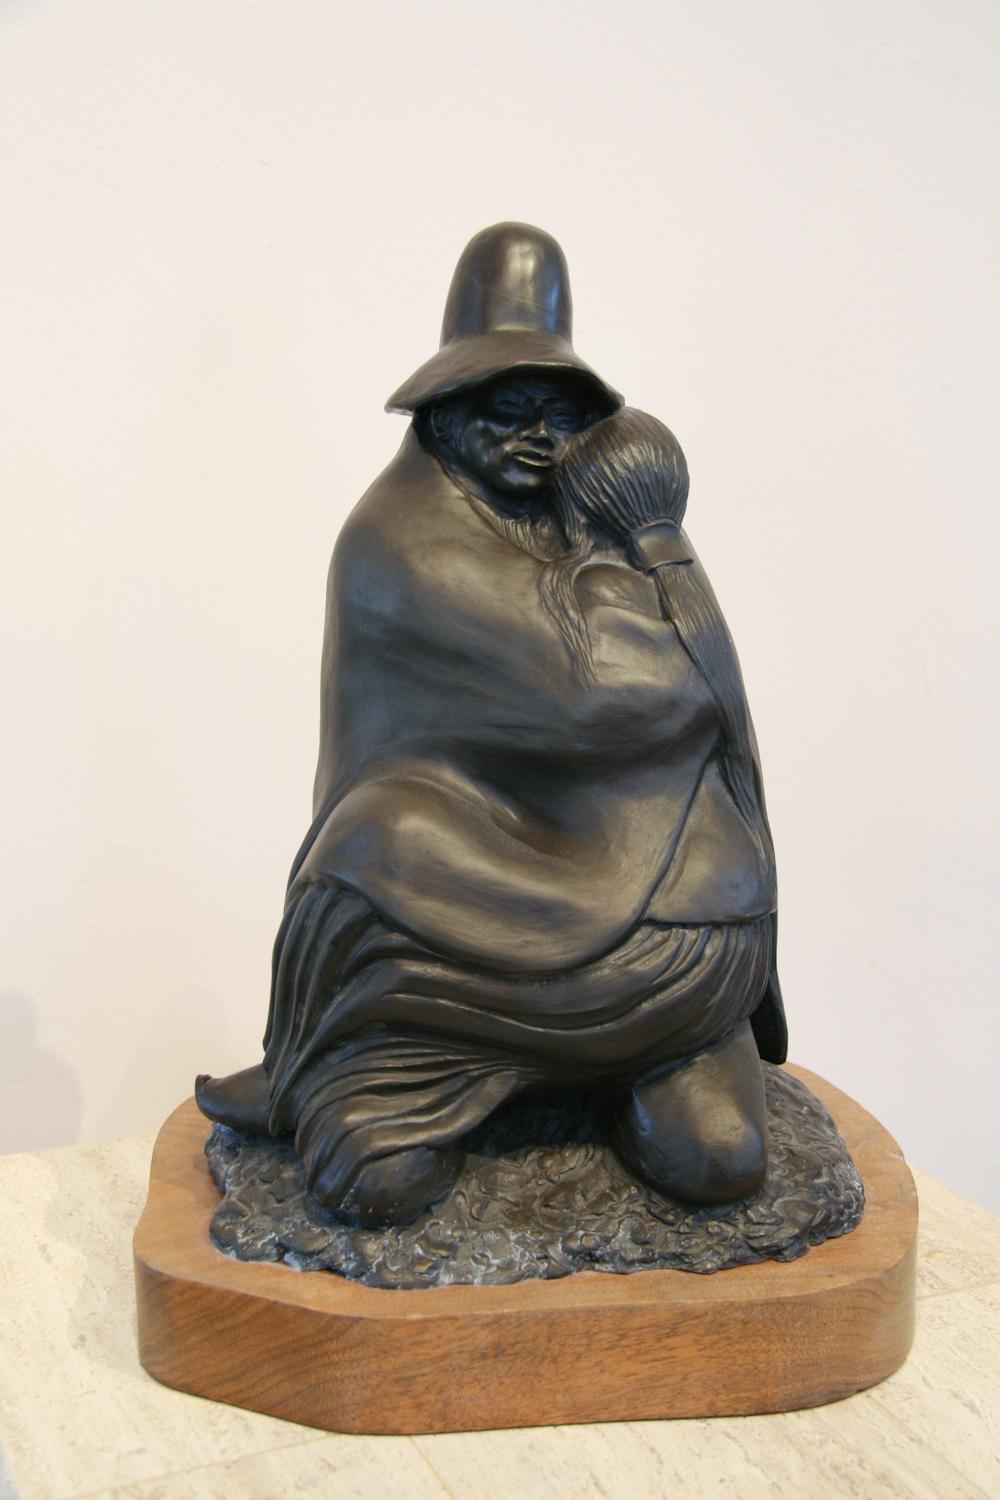 his sculpture “offering of the sacred pipe” is on display in nyc.